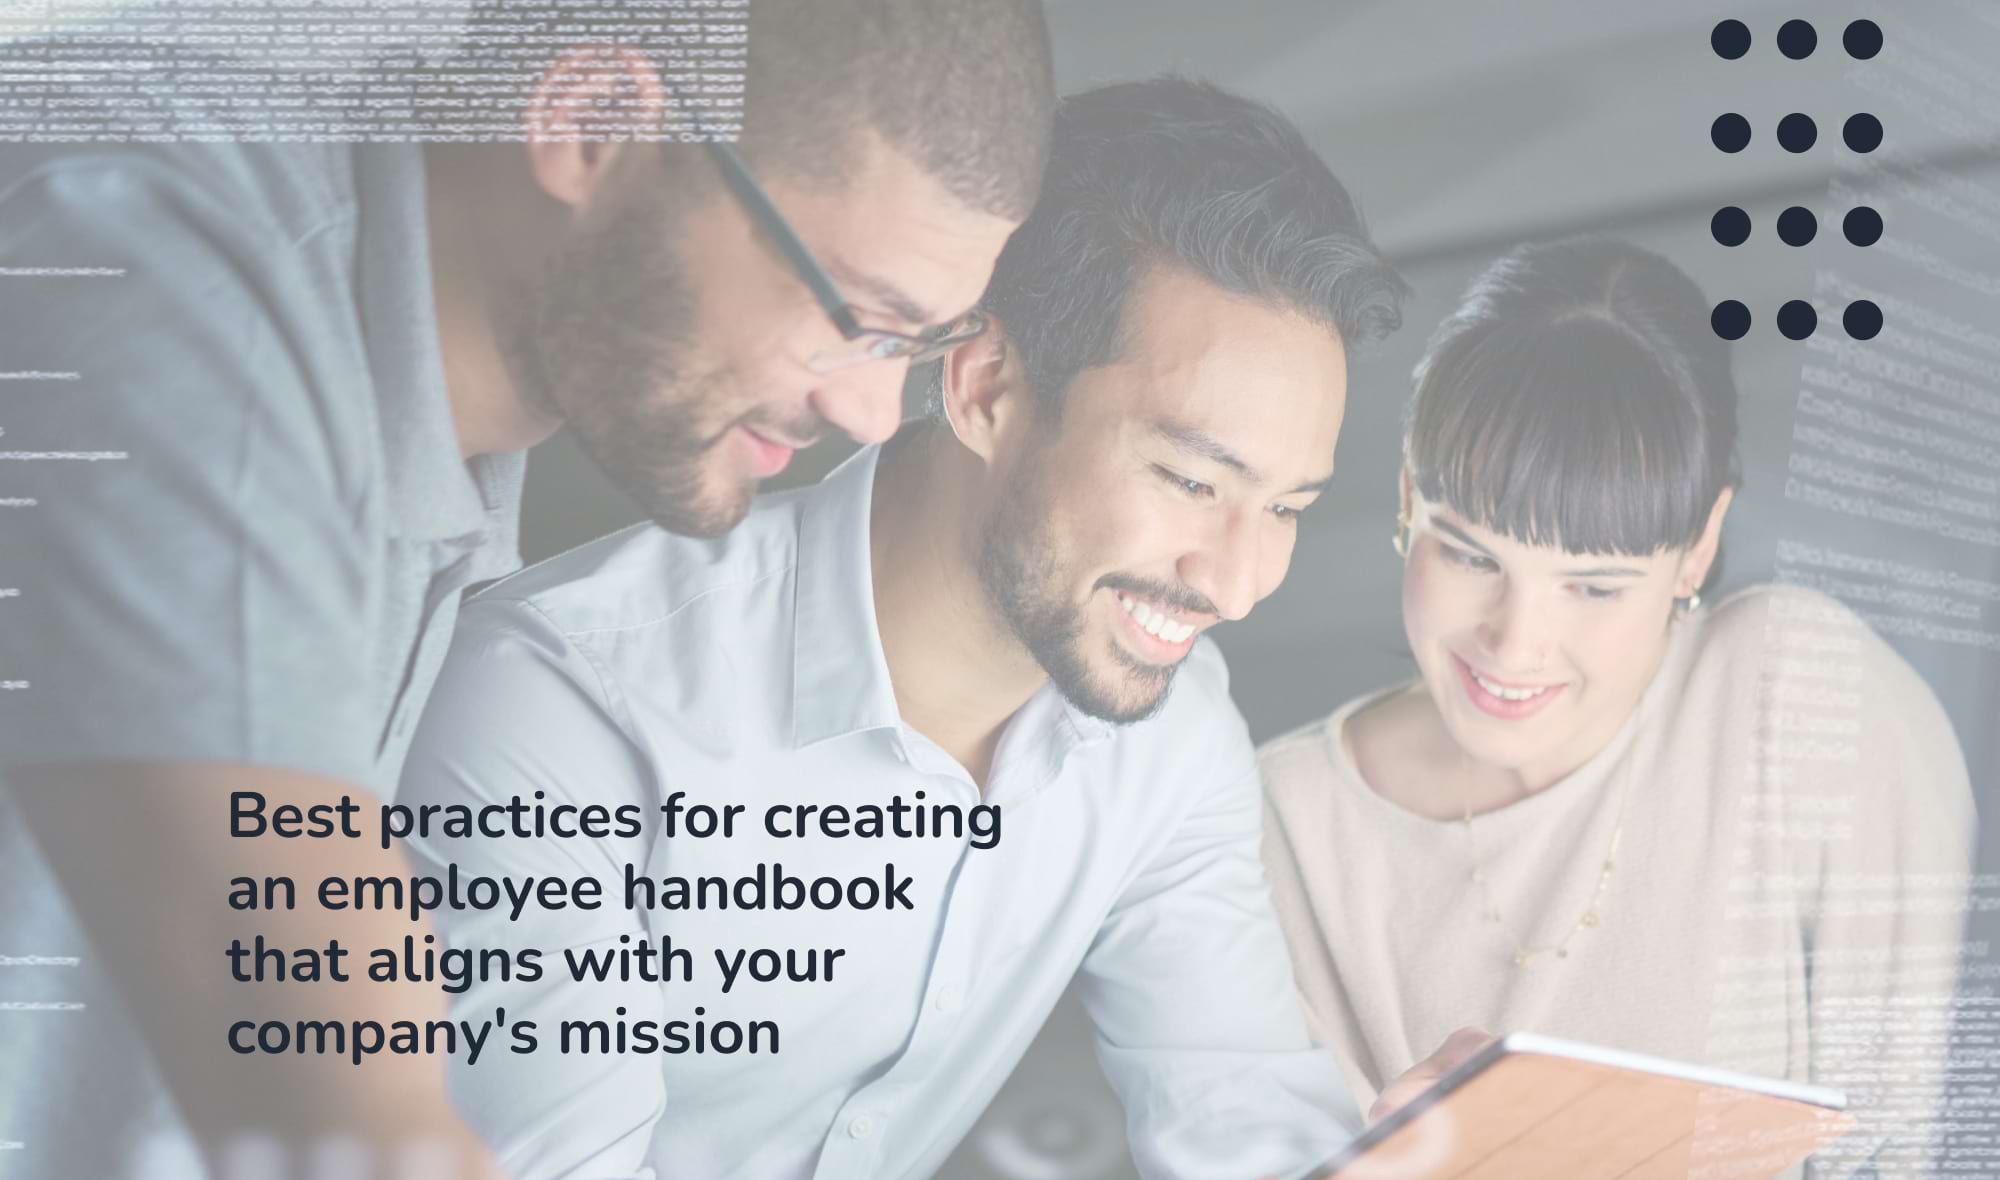 Handbook for employees - Best practices for creating an employee handbook that aligns with your company's mission